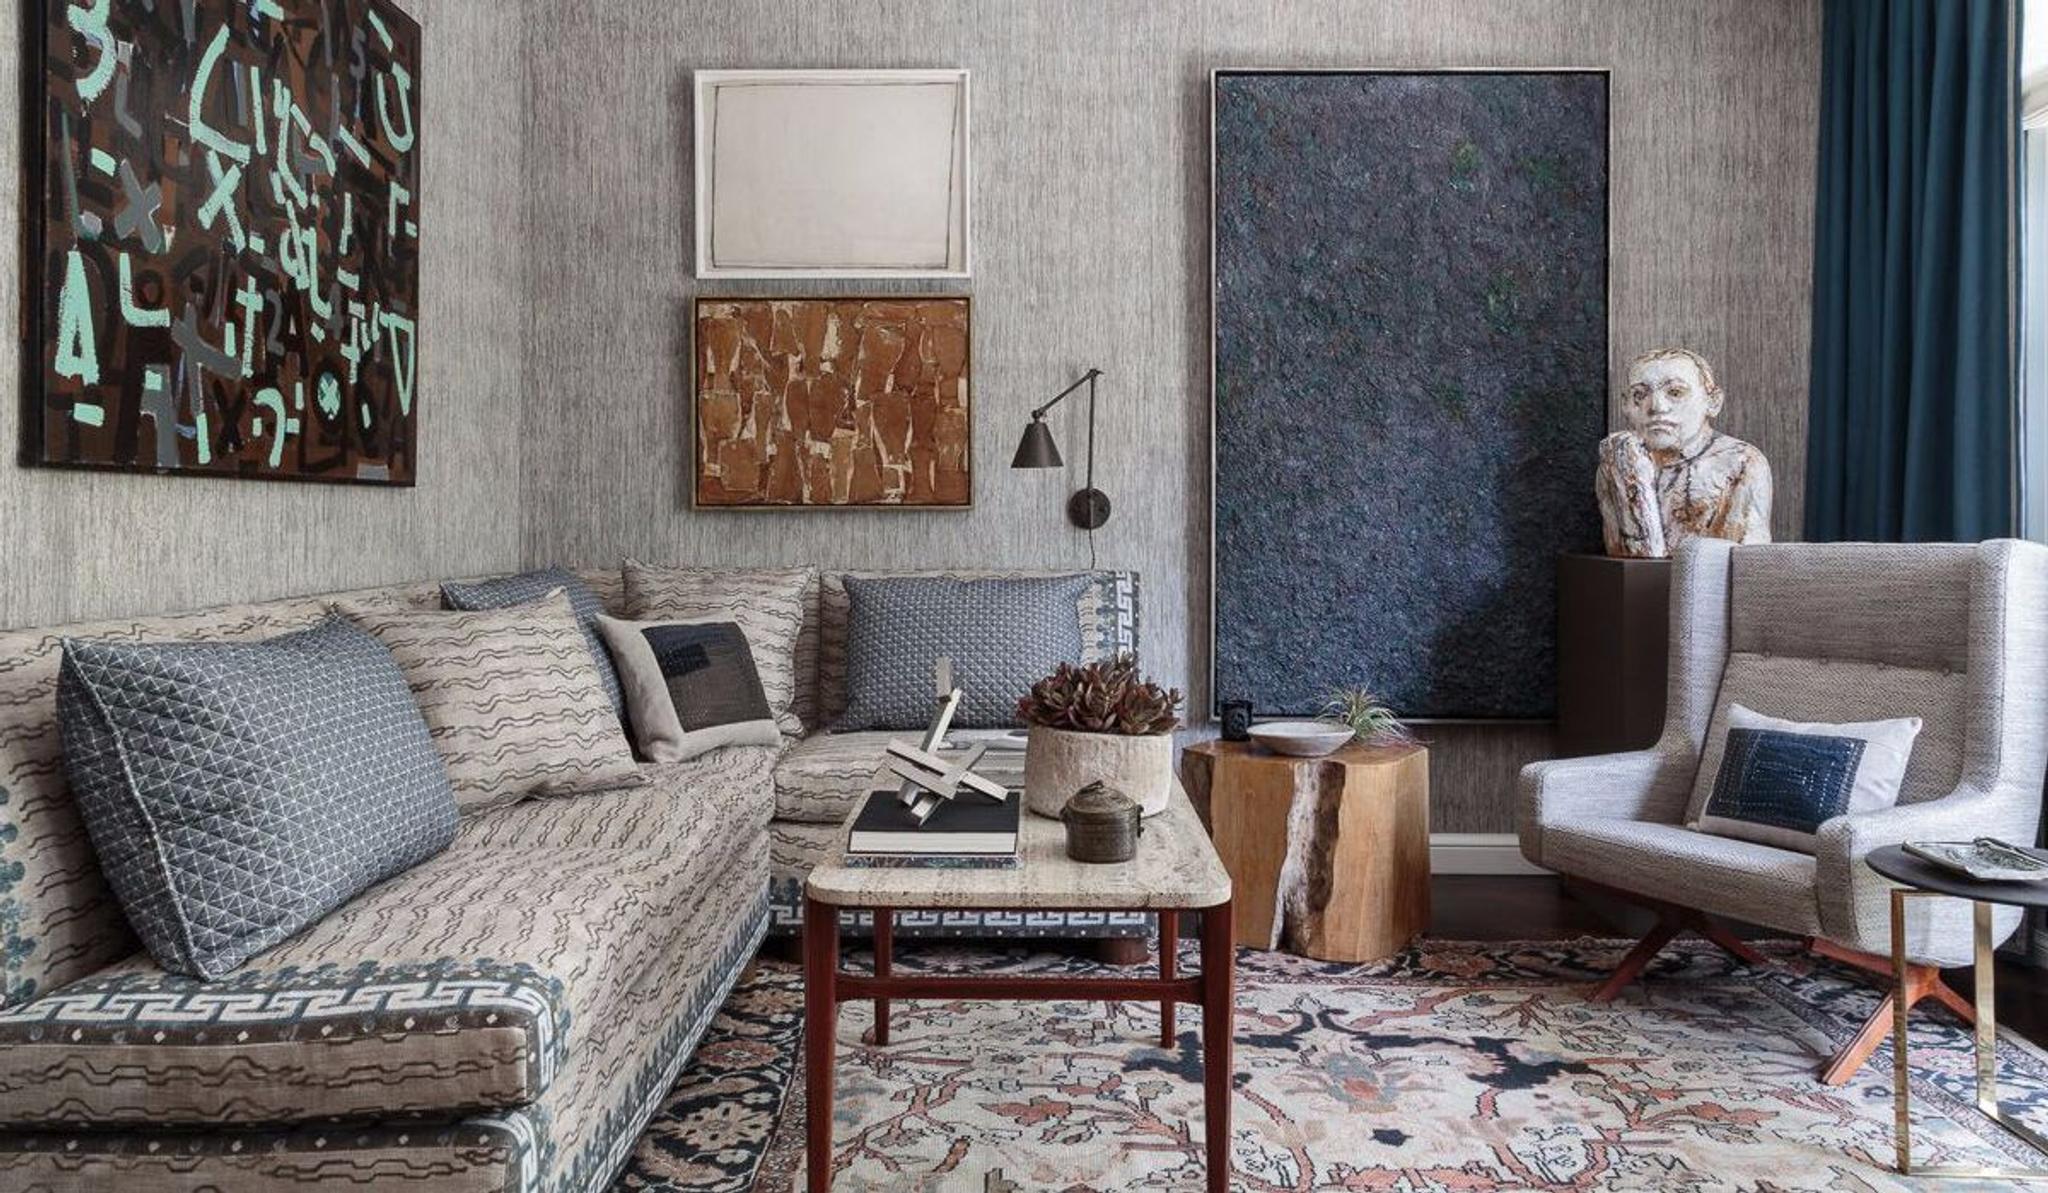 Layered textures and patterns weave a sophisticated andmasculine undercurrent into a study. Photography by David Duncan Livingston